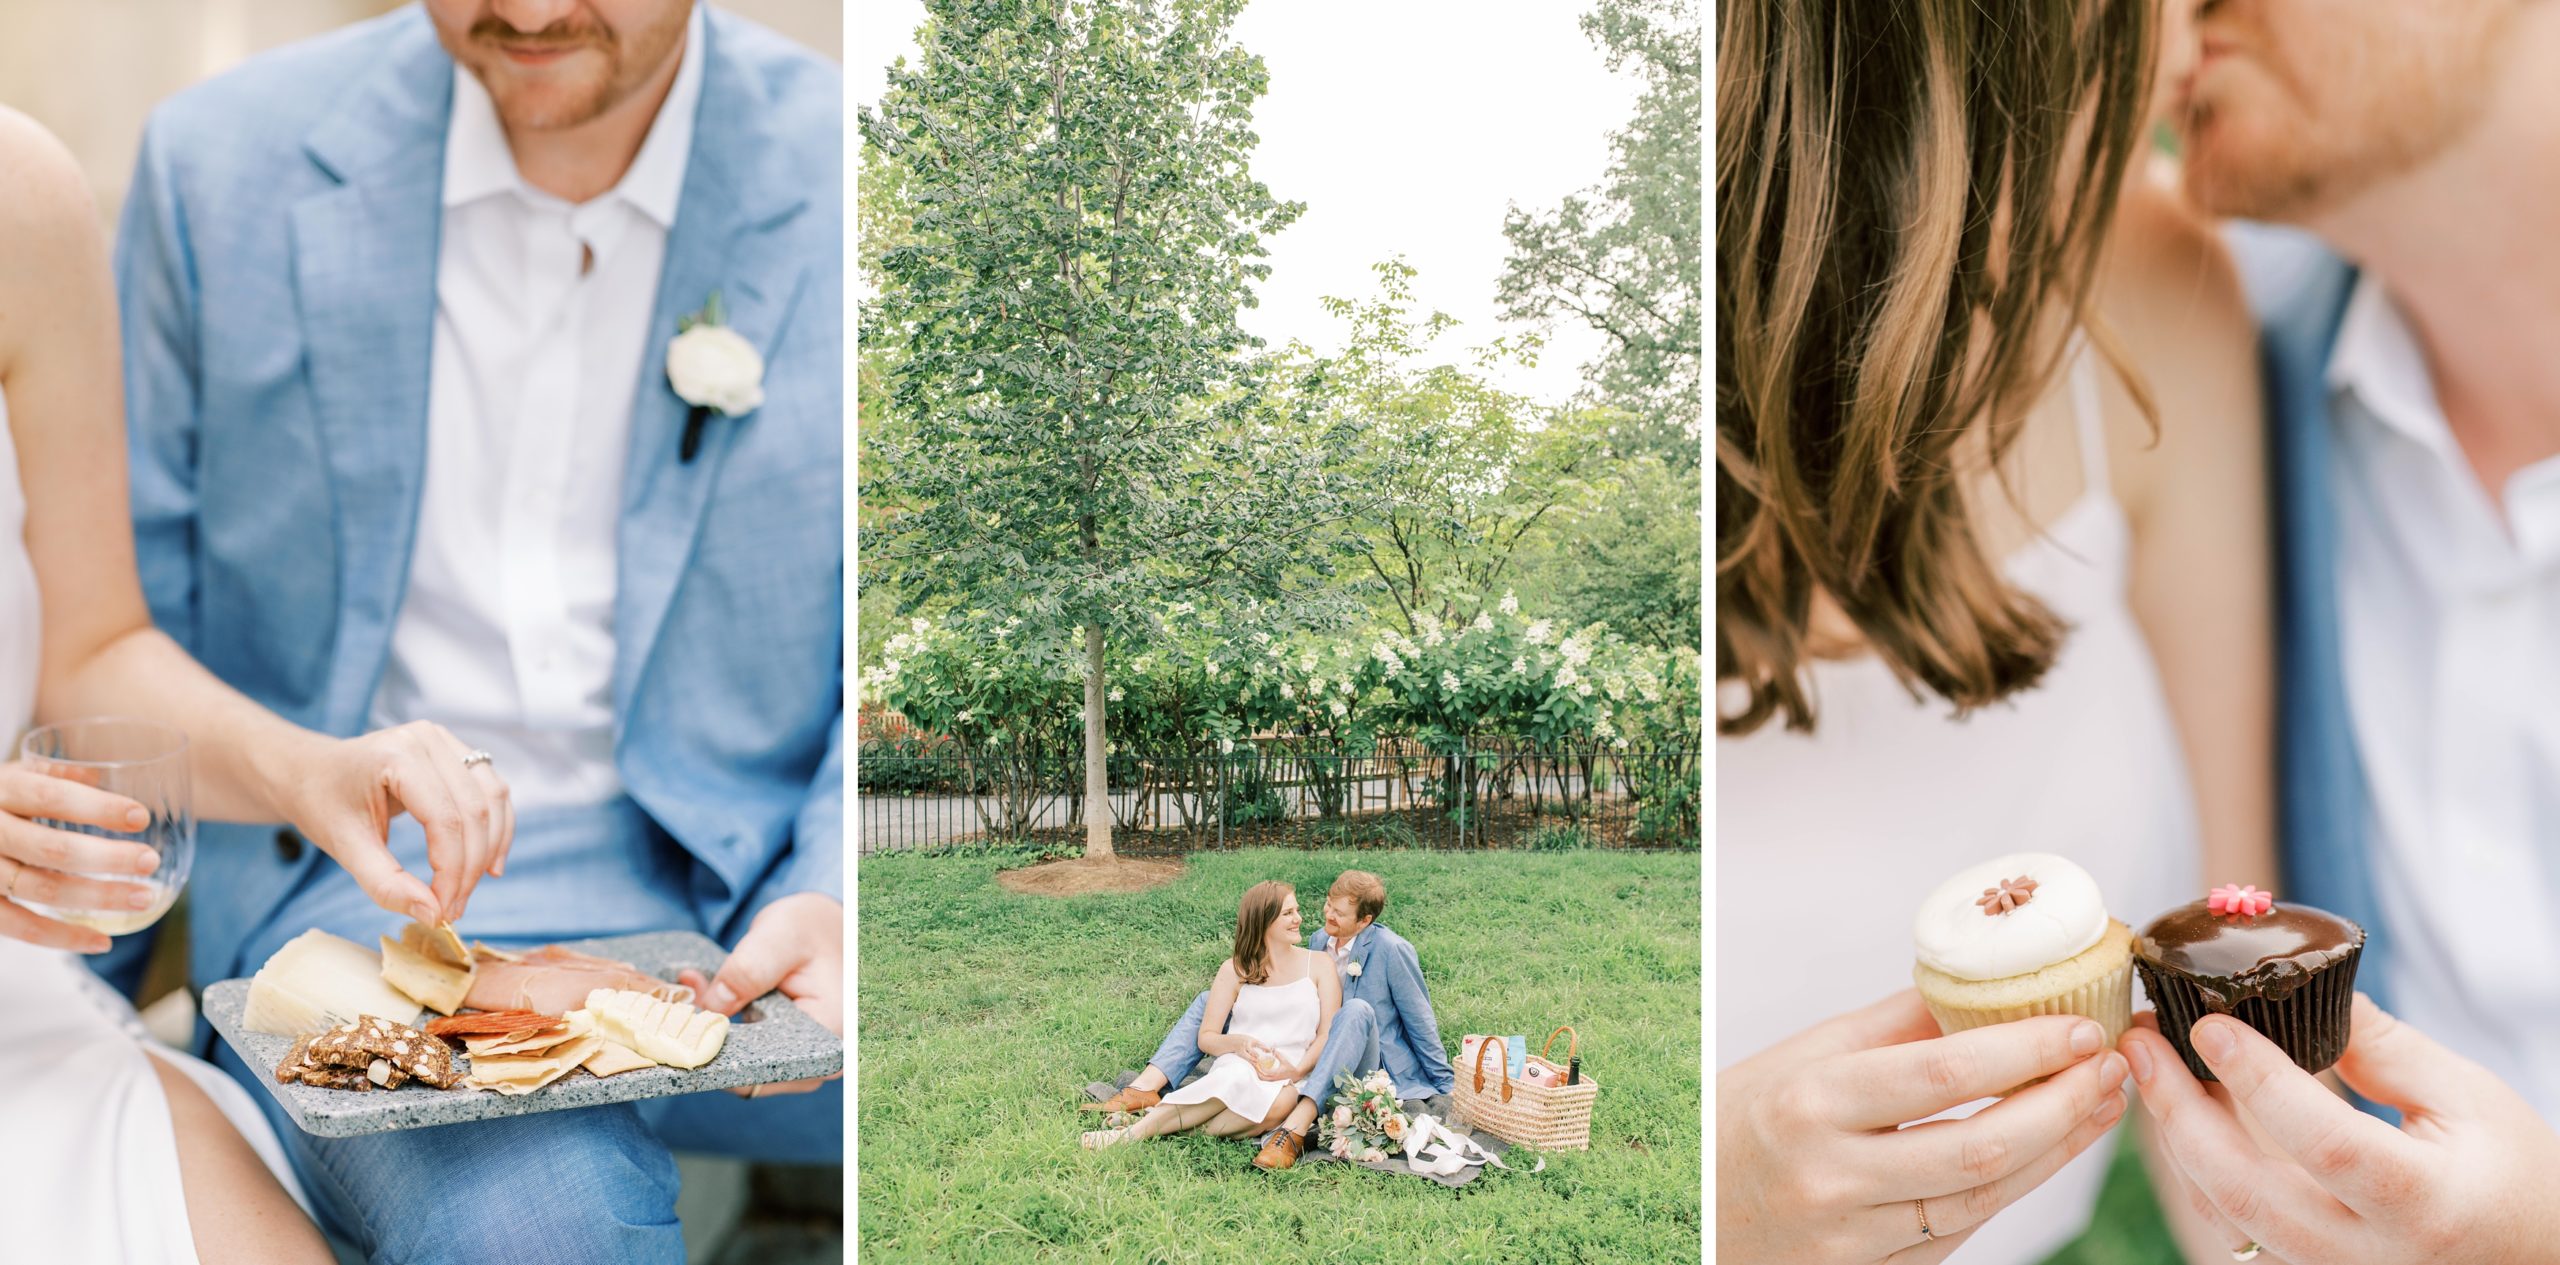 An intimate elopement wedding at the Spanish Steps in the Kalorama neighborhood of Washington, DC; complete with a newlywed picnic!